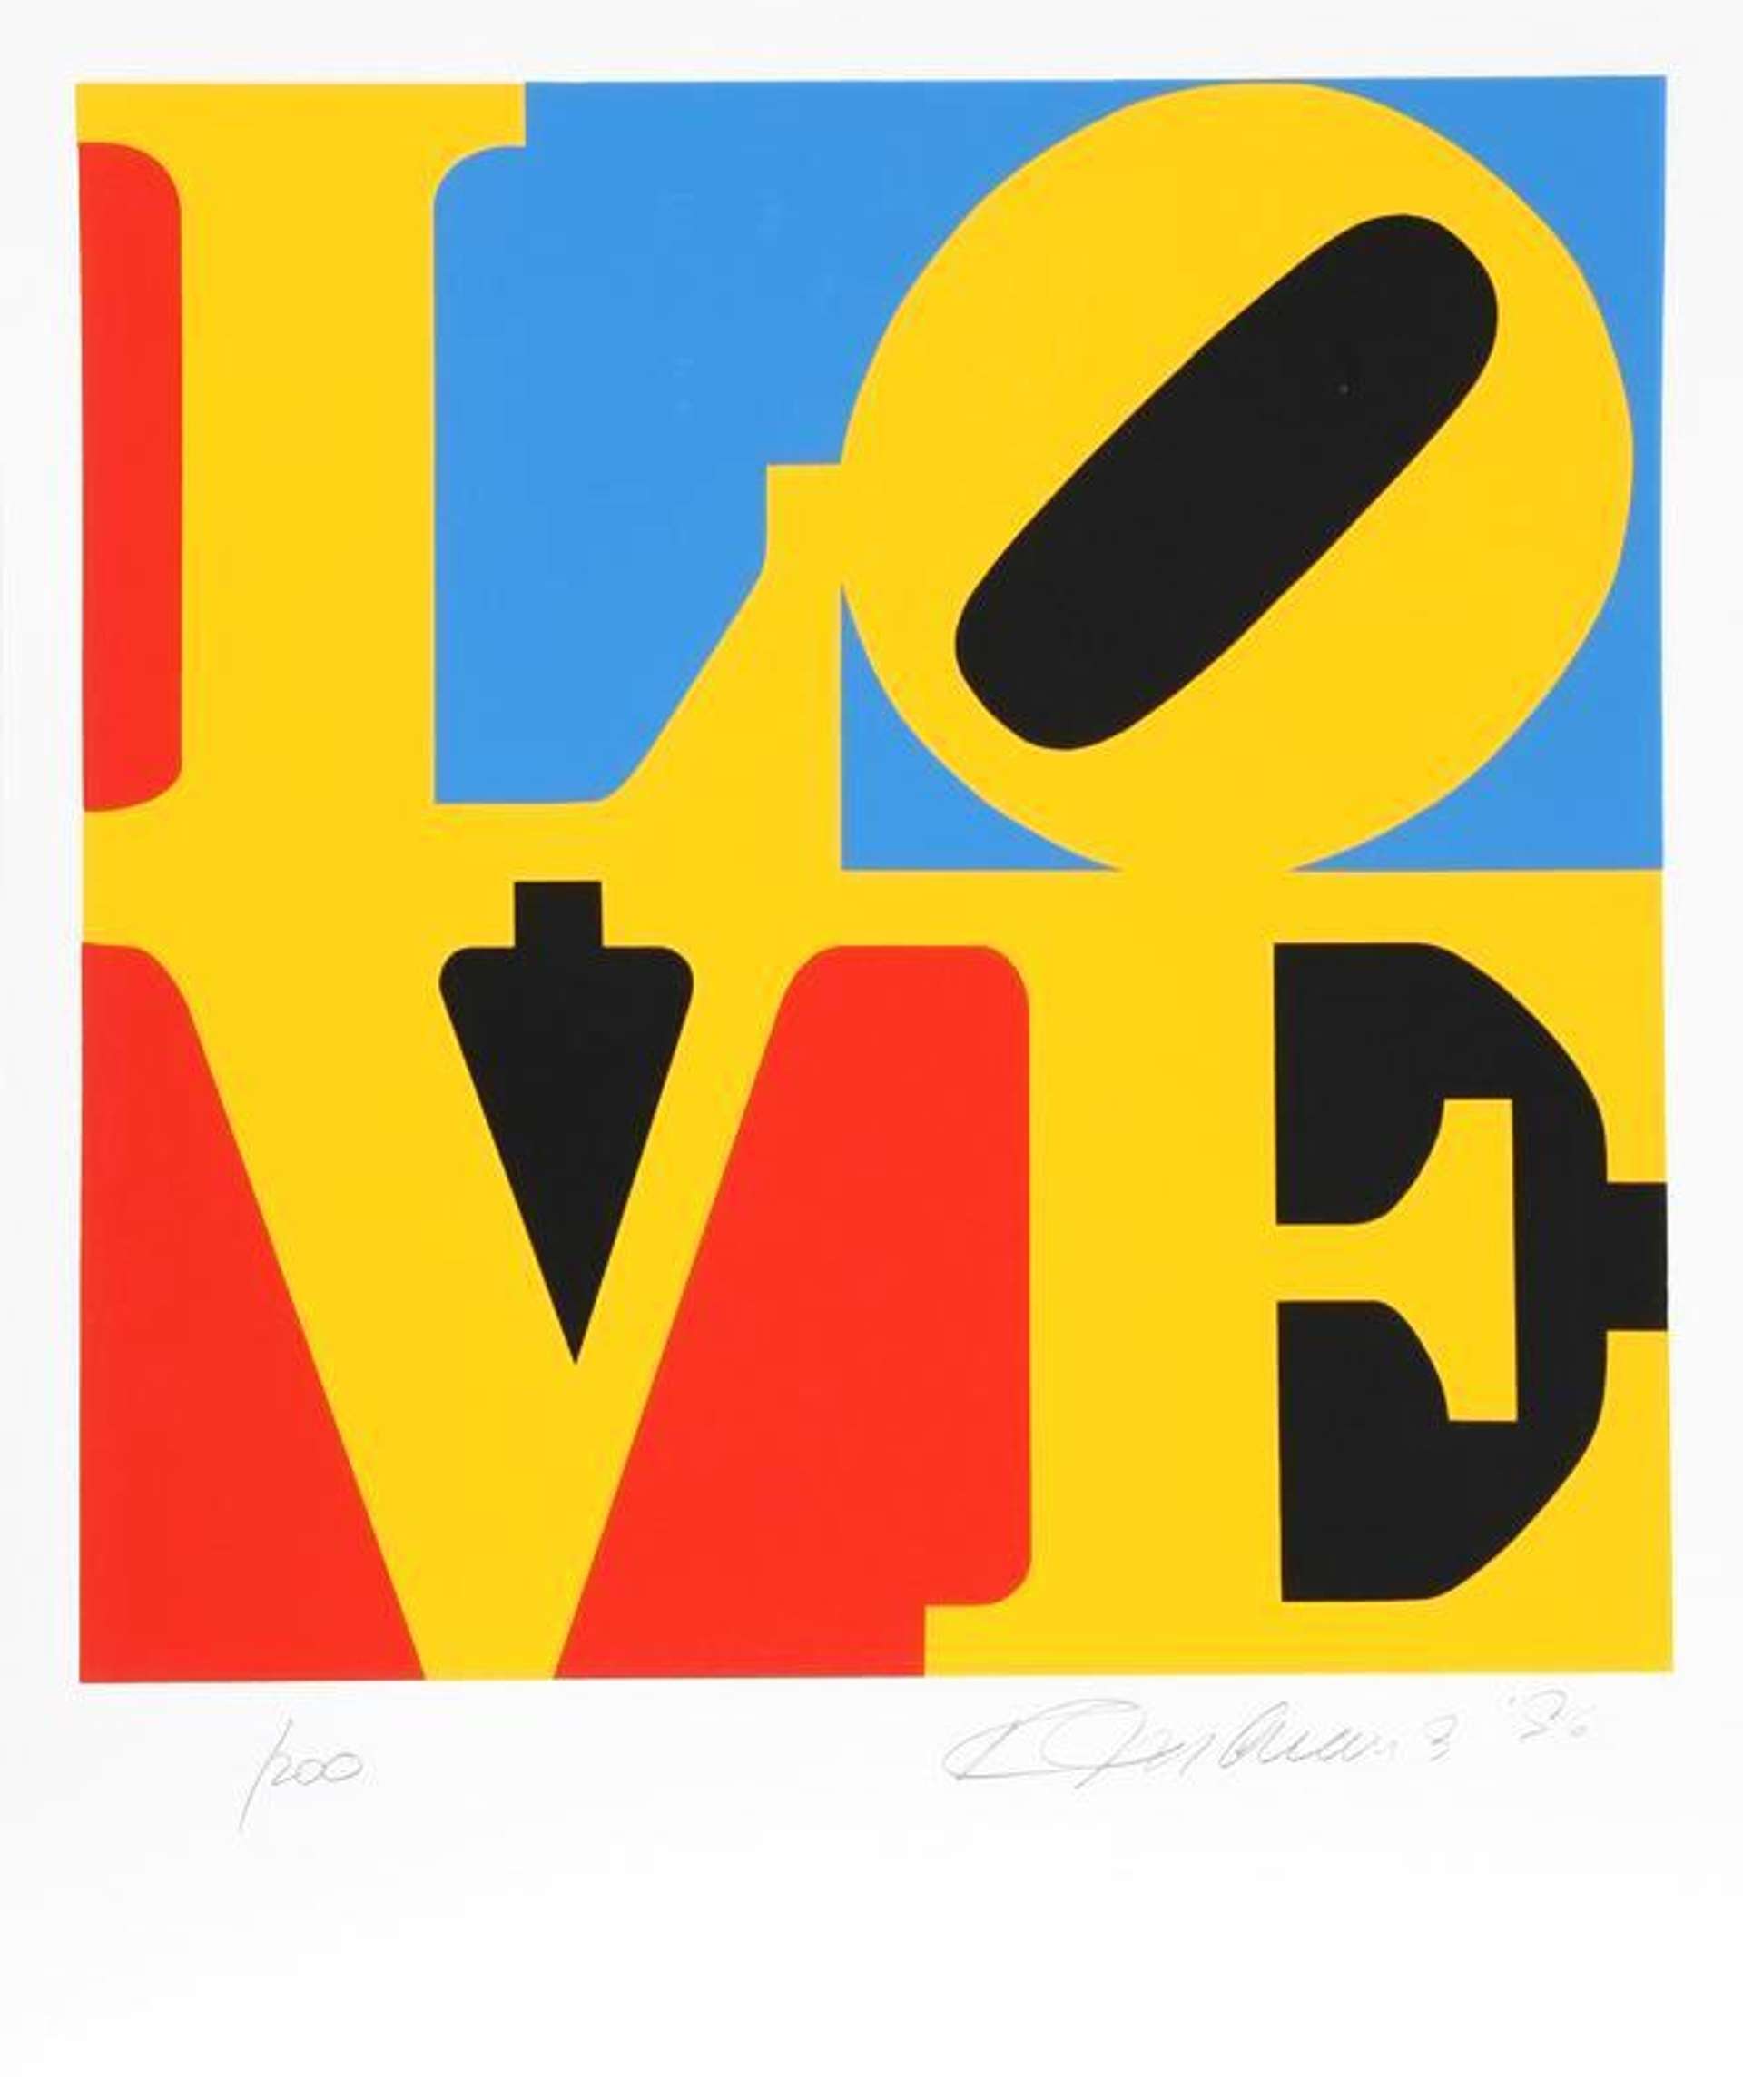 Robert Indiana: The Book Of Love (yellow, red and blue) - Signed Print